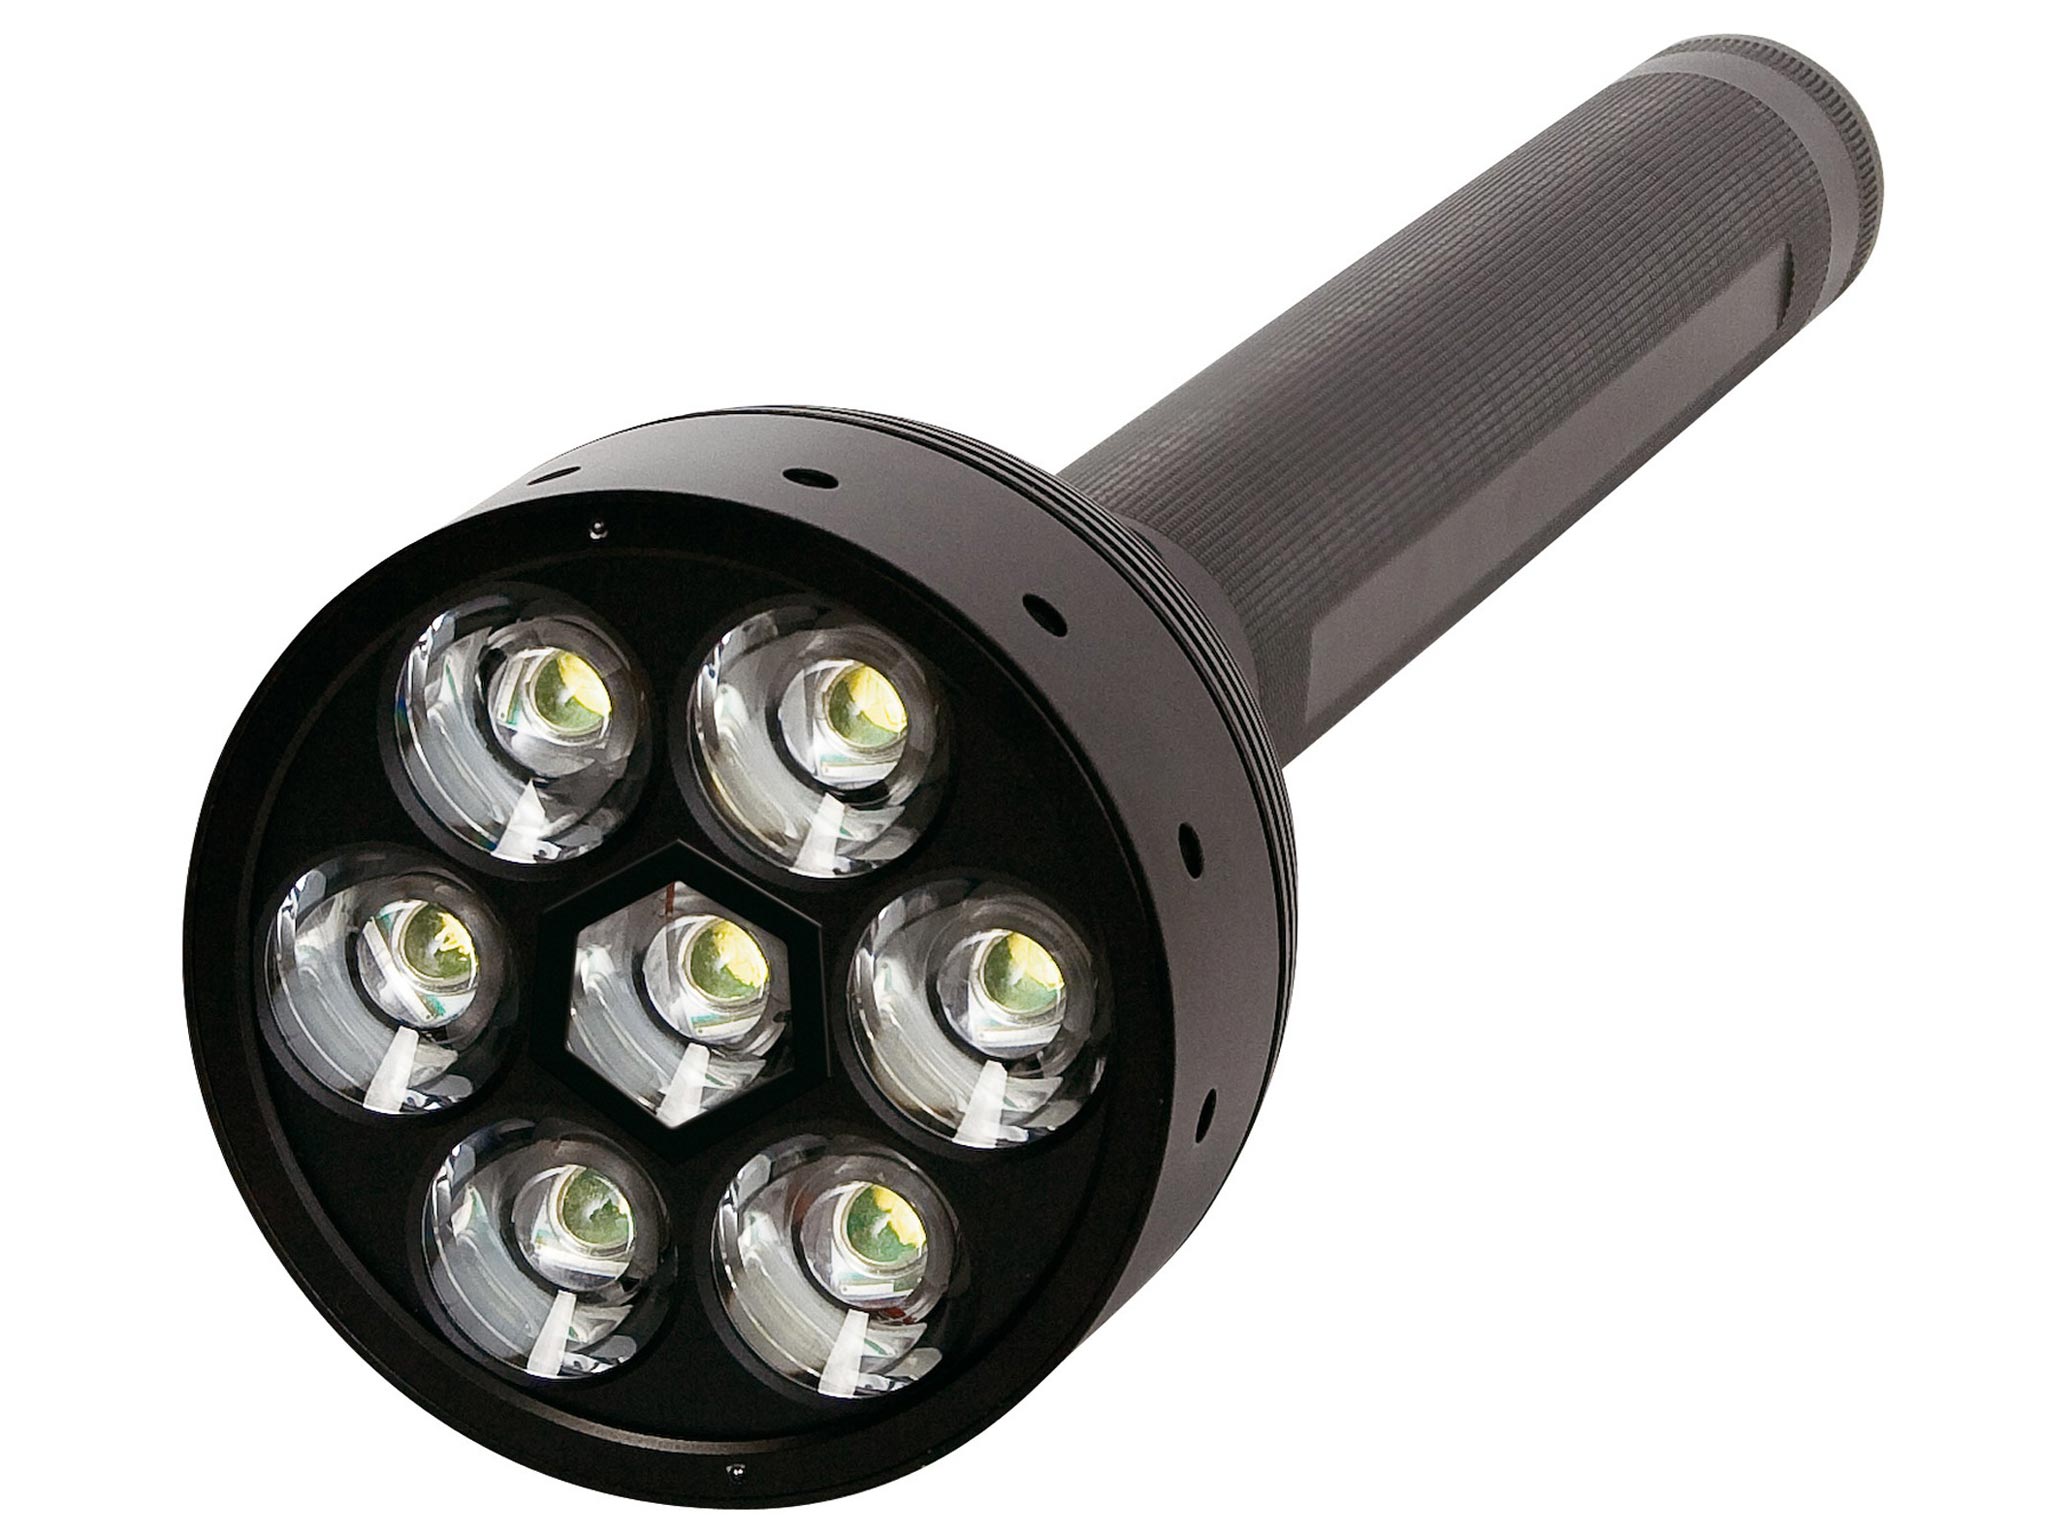 Leading light: 10 best torches